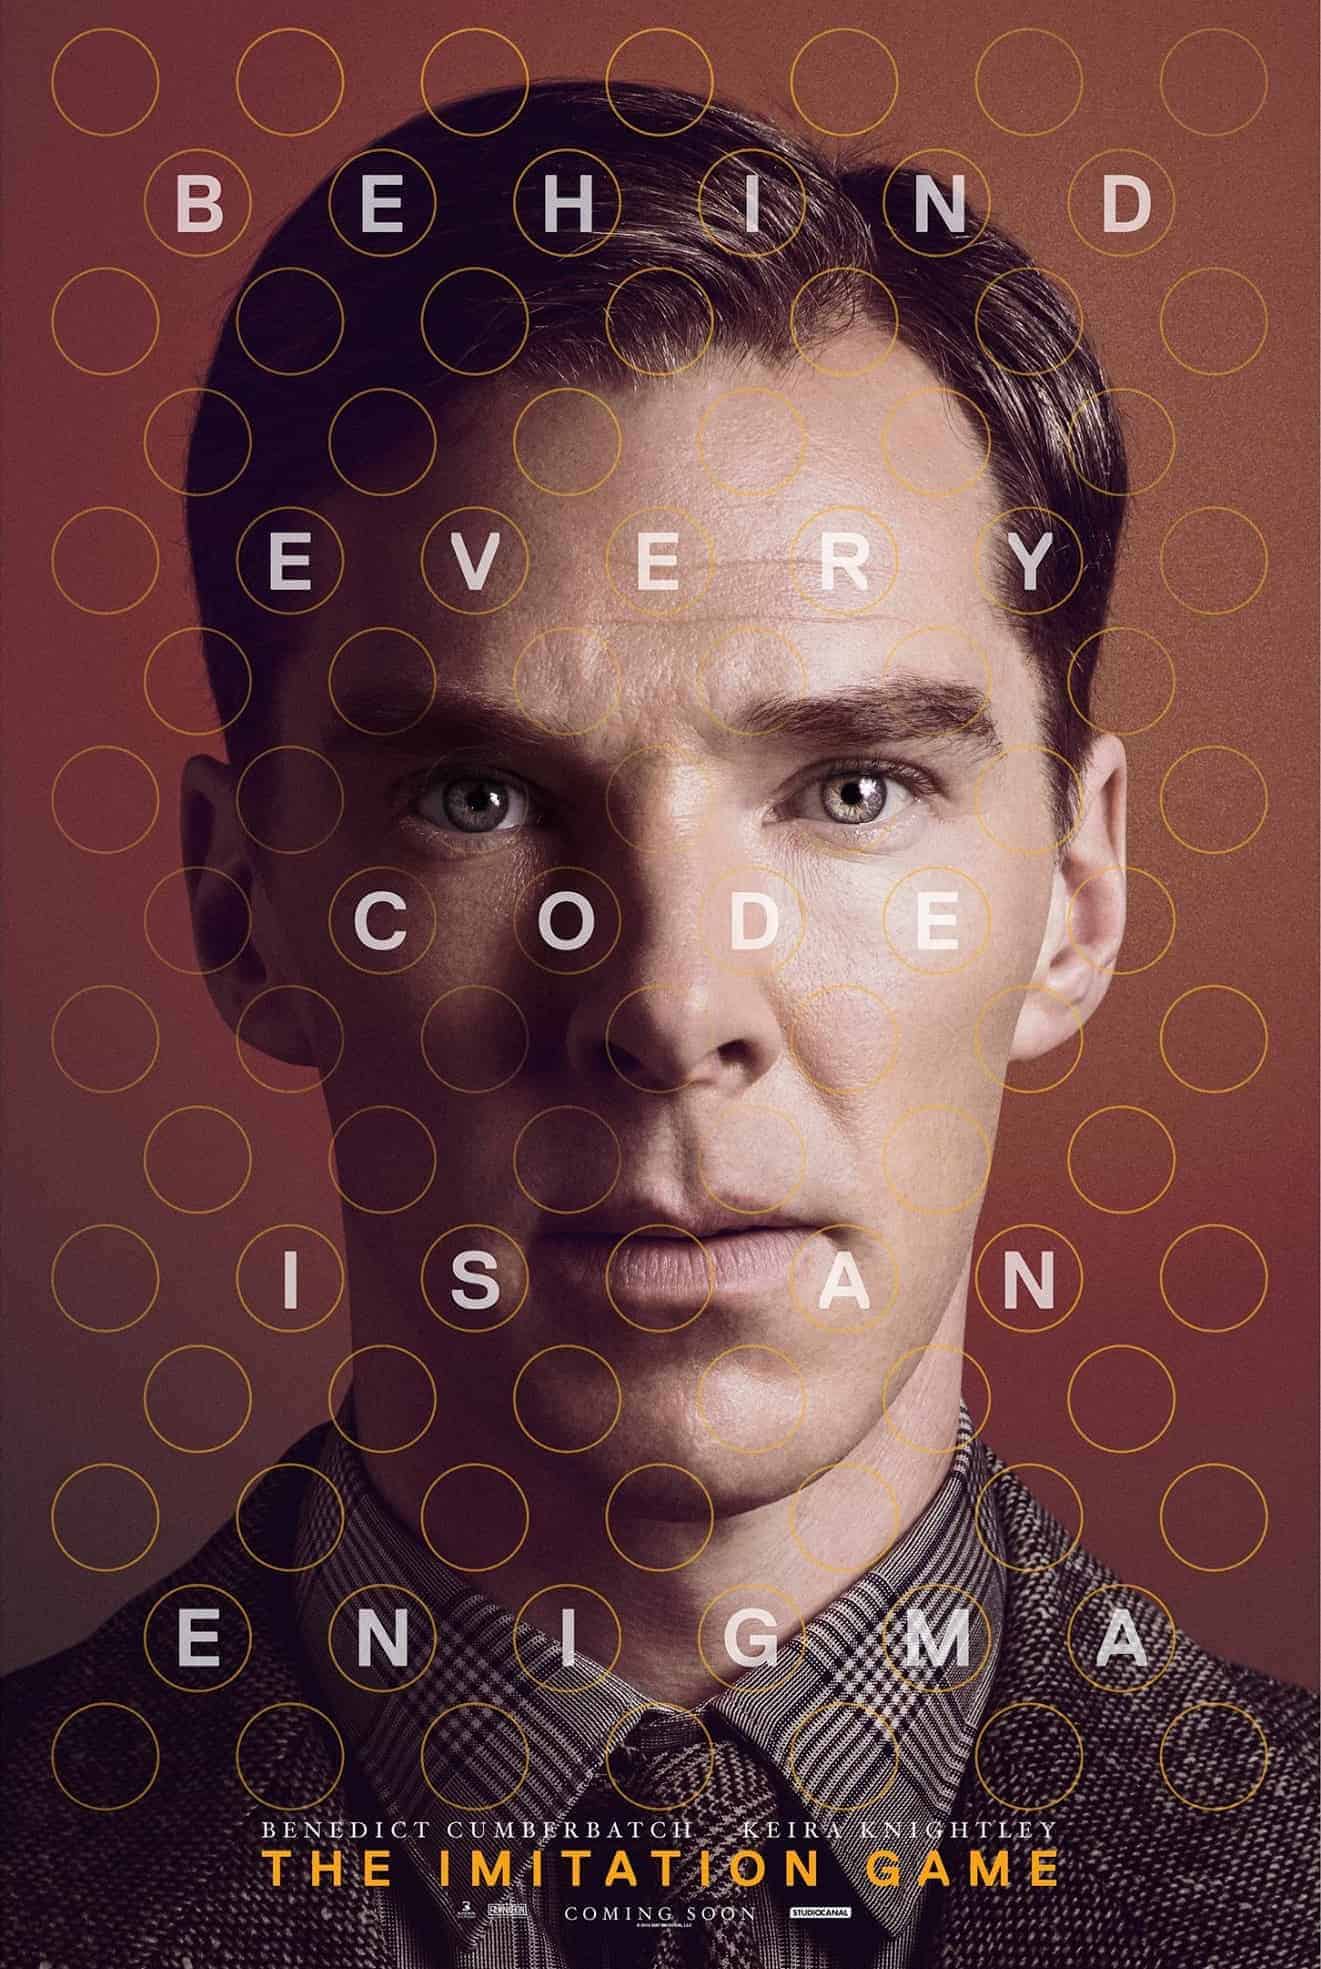 The Imitation Game (2014) Best Math Movies to Add in Your Watchlist